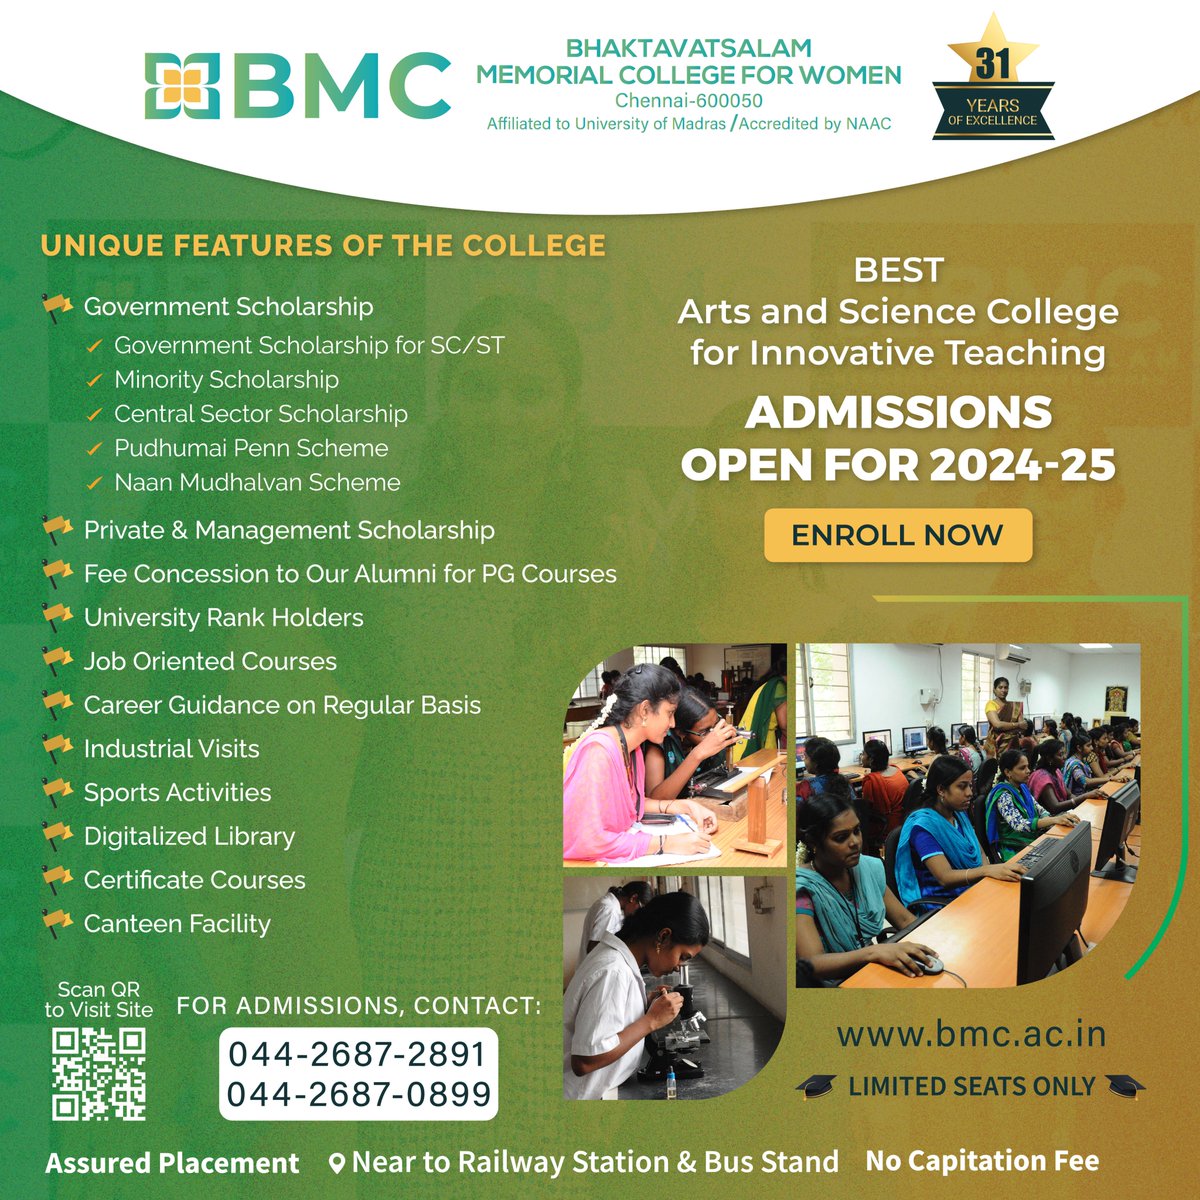 Admissions Open for 2024-25 - Apply Now 
🌎 bmc.ac.in 
Imparting knowledge to empower students to be successful in the increasingly diverse and ever-changing world. 
#admissionsopen #applynow #bestartsandsciencecollege #innovativeteaching